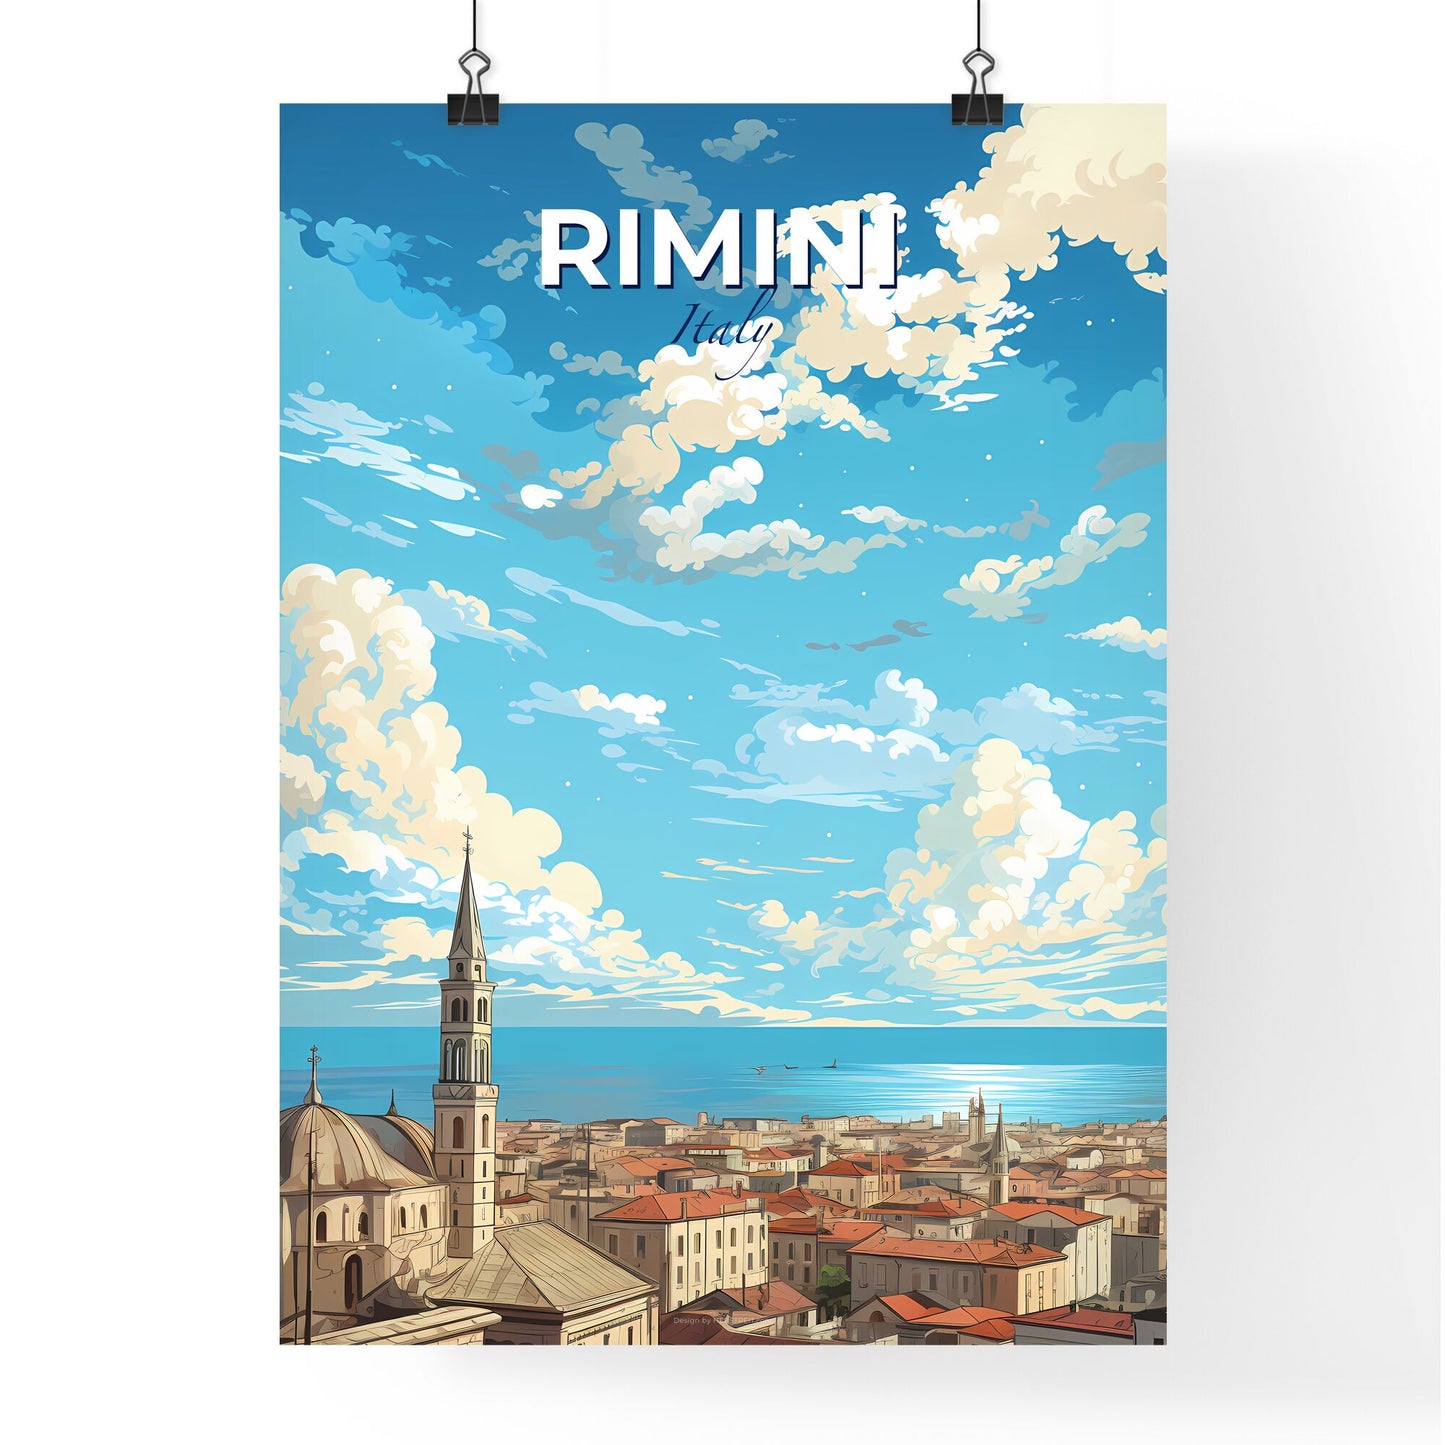 Rimini Italy Skyline - A City With A Dome And A Domed Roof - Customizable Travel Gift Default Title